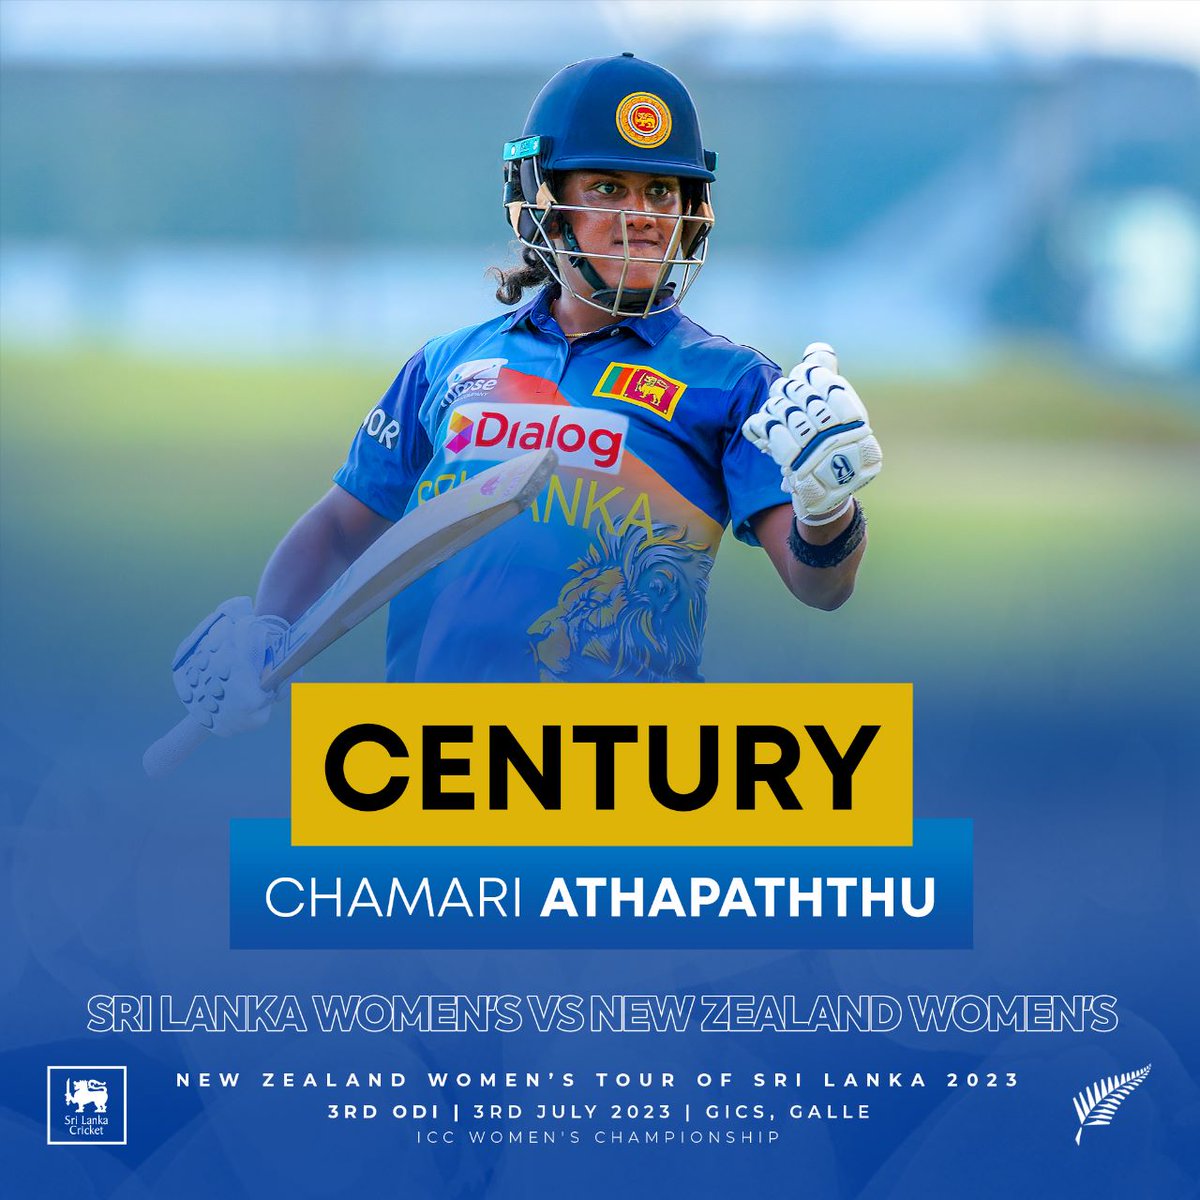 Chamari Athapaththu celebrates her 8th ODI century! 🎉🏏 Second one in this tournament. 🌟 

#LionessRoar #SLvNZ